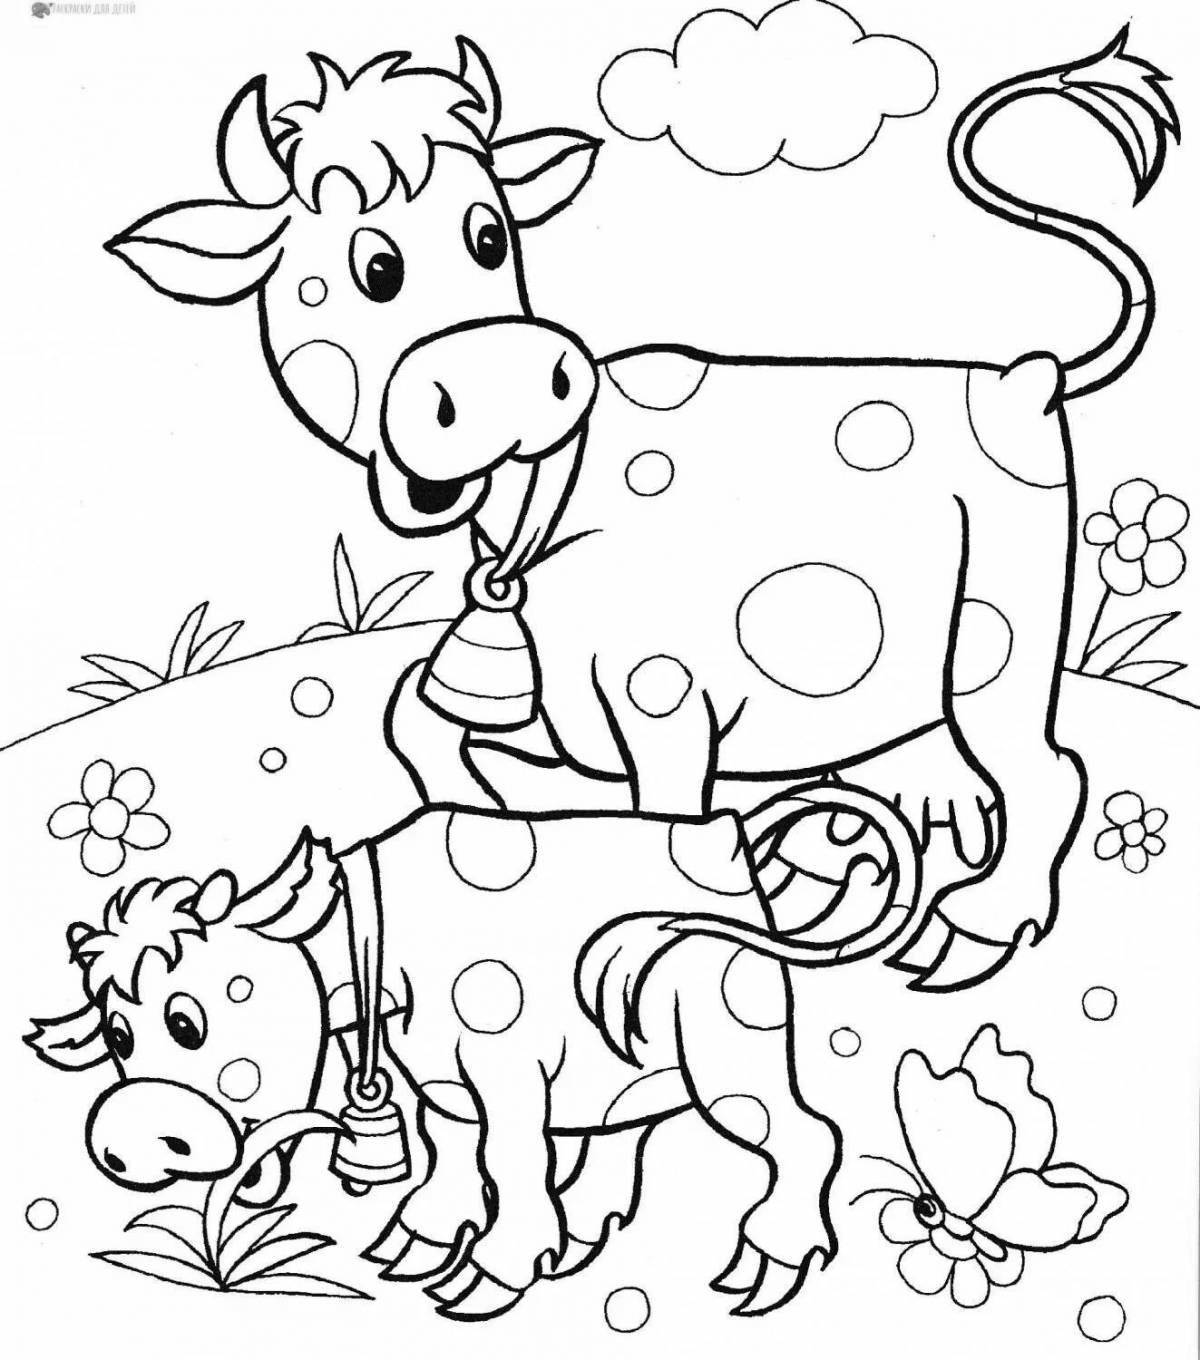 Adorable cow coloring page for kids